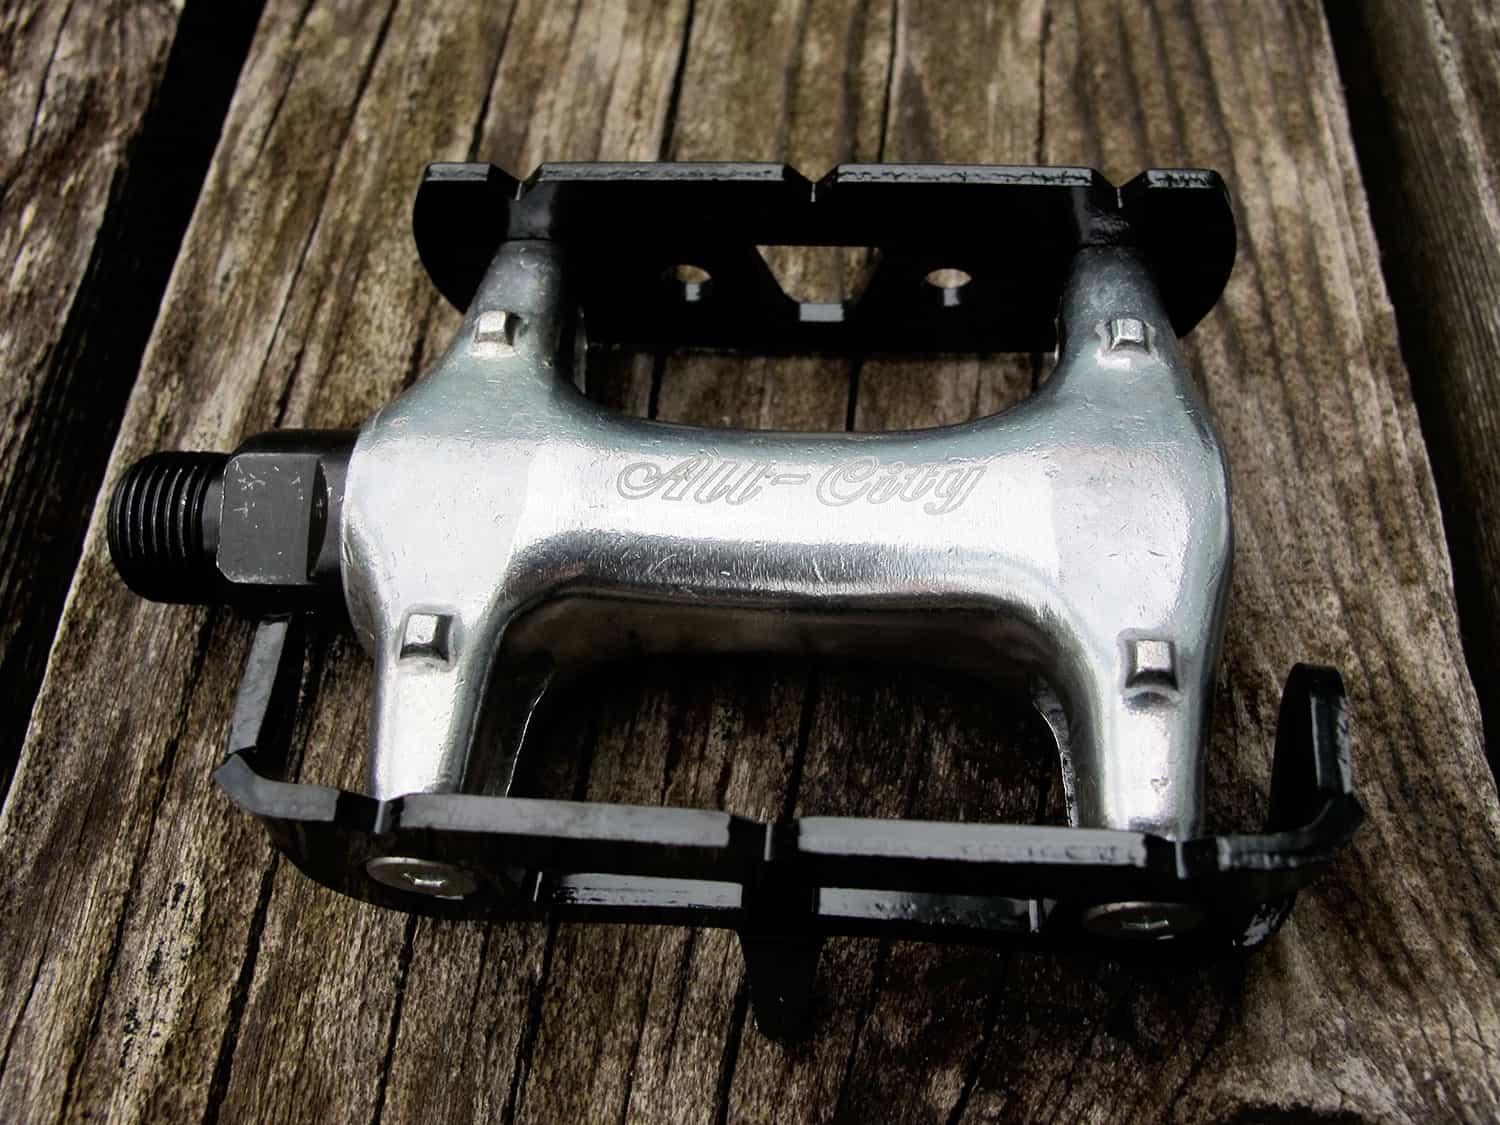 Black and polished silver standard track pedal against wood background